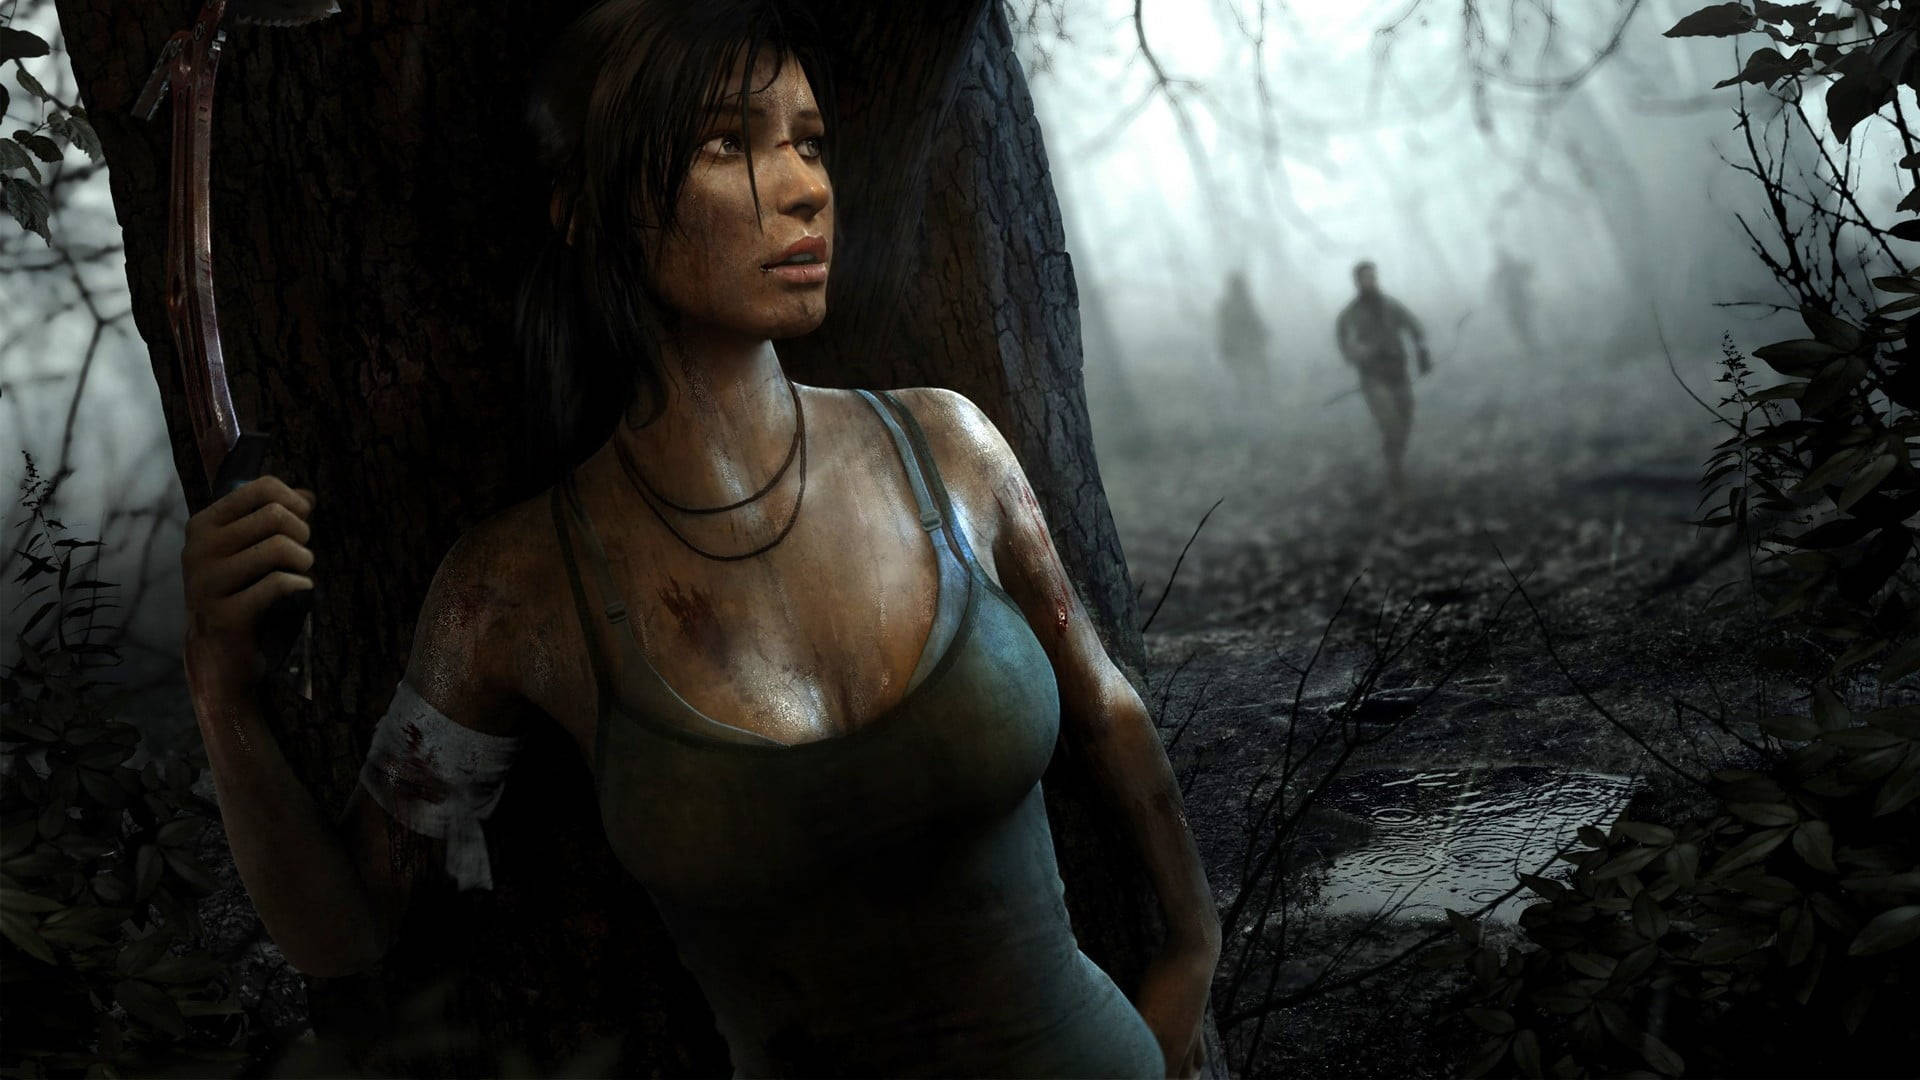 Rise Of The Tomb Raider - Lara Croft In Stealth Mode